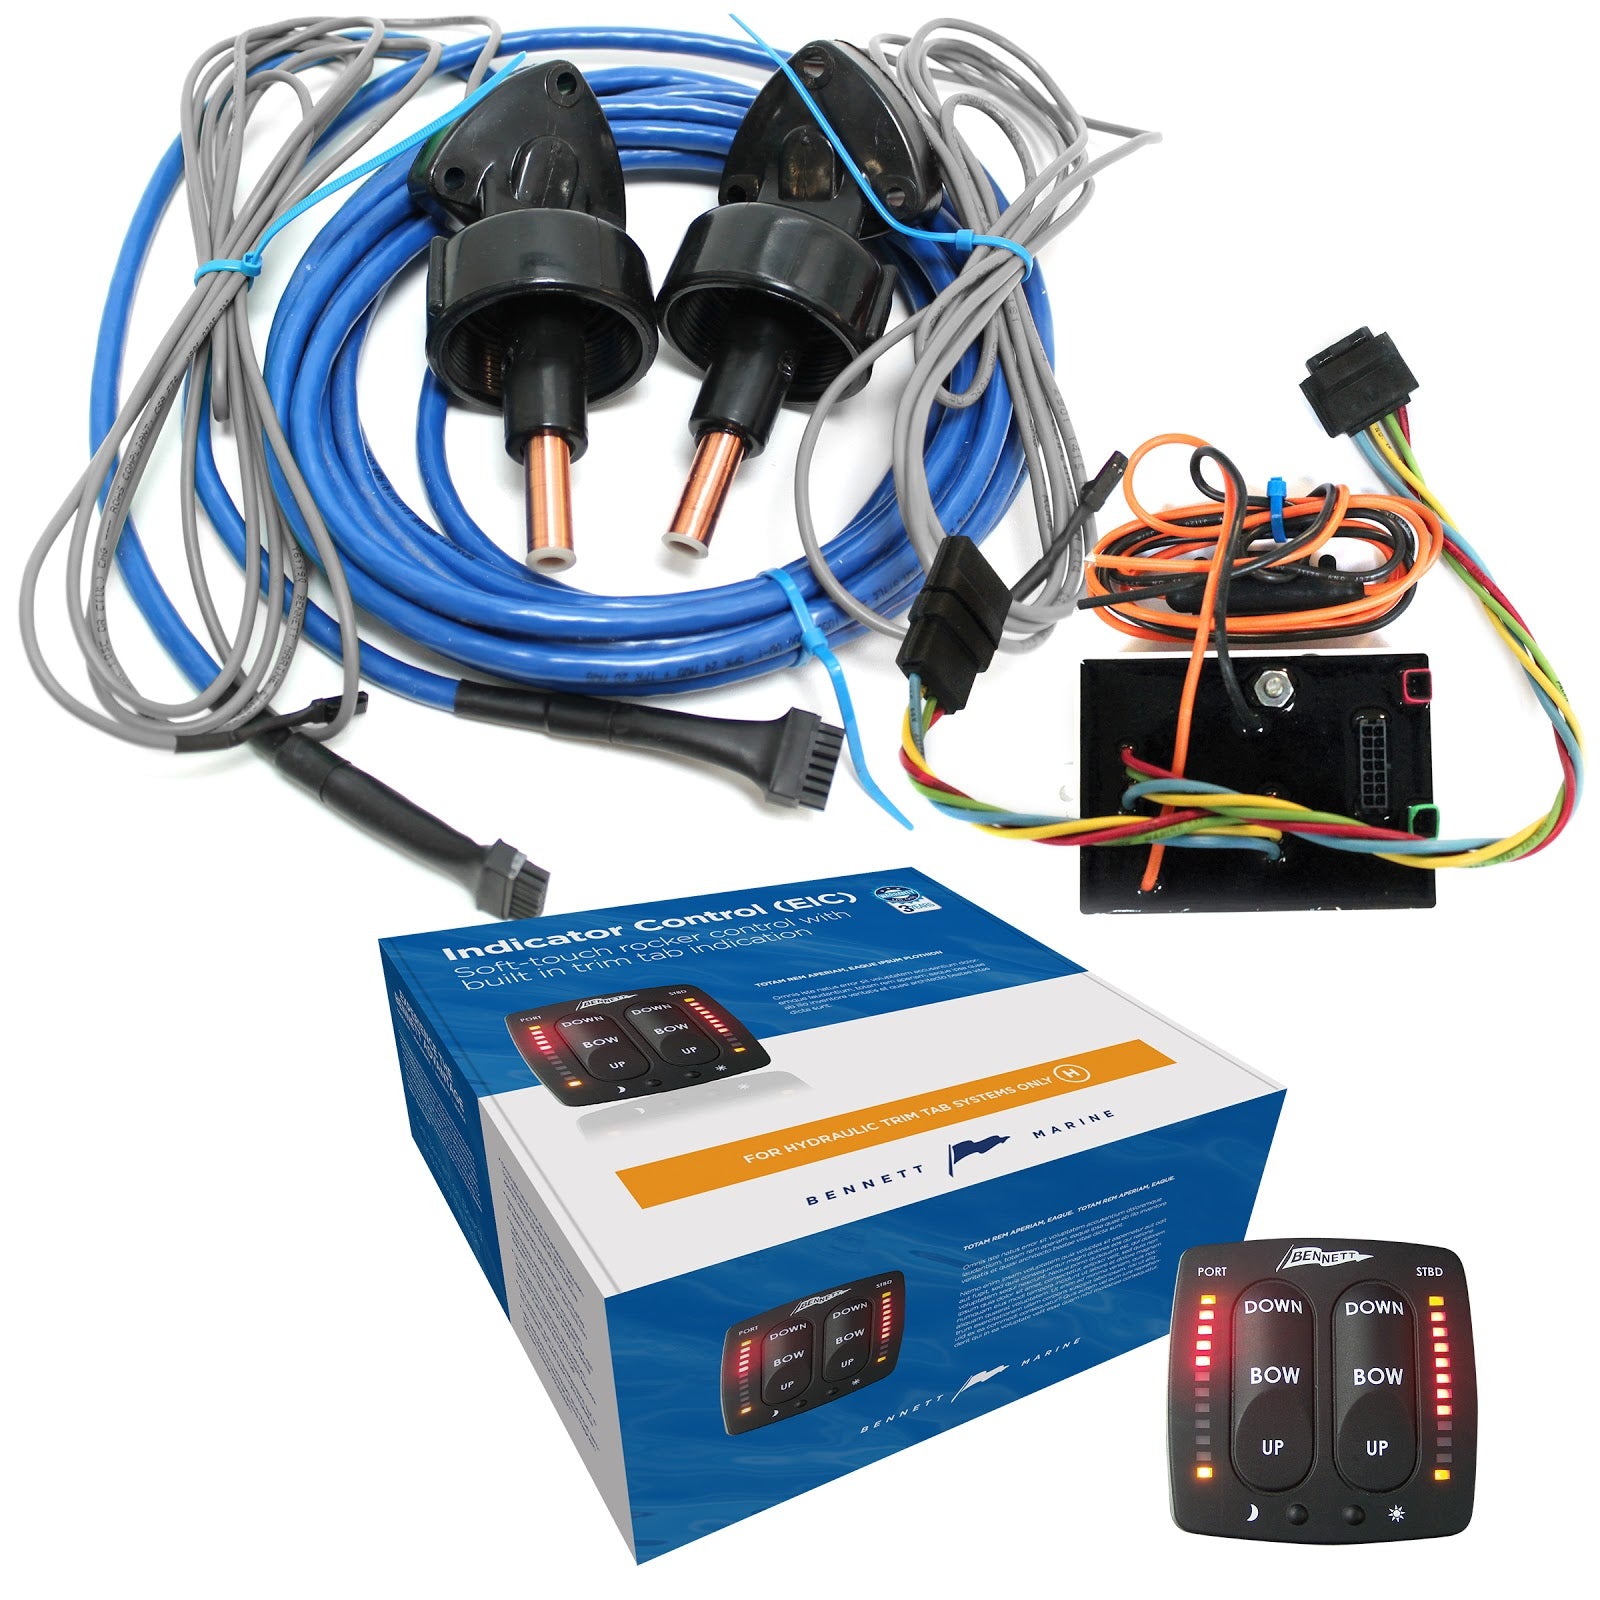 BENNETT Electronic Indicator Control (EIC) Electronic Indication Control Kit - Cables/Sensors Included - 12V